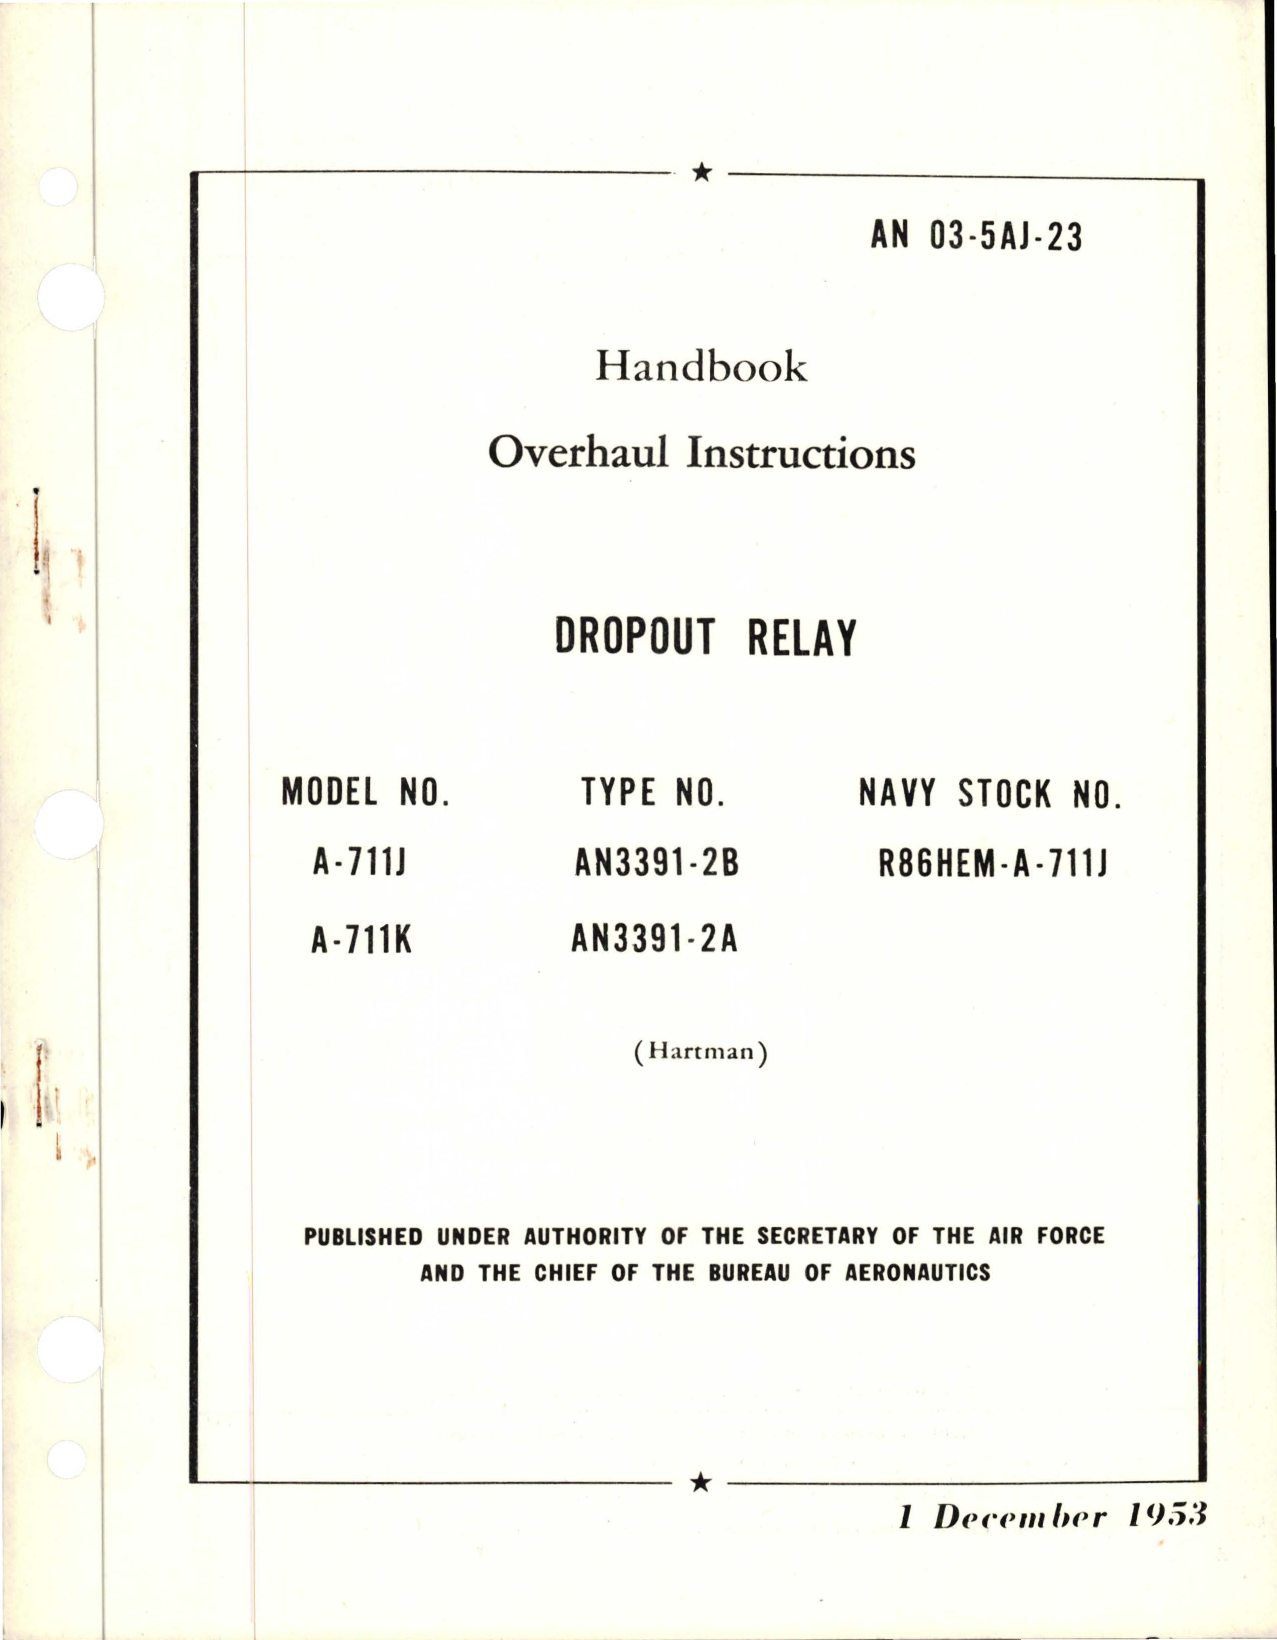 Sample page 1 from AirCorps Library document: Overhaul Instructions for Dropout Relay - Model A-711J and A-711K - Type AN3391-2B and AN3391-2A 